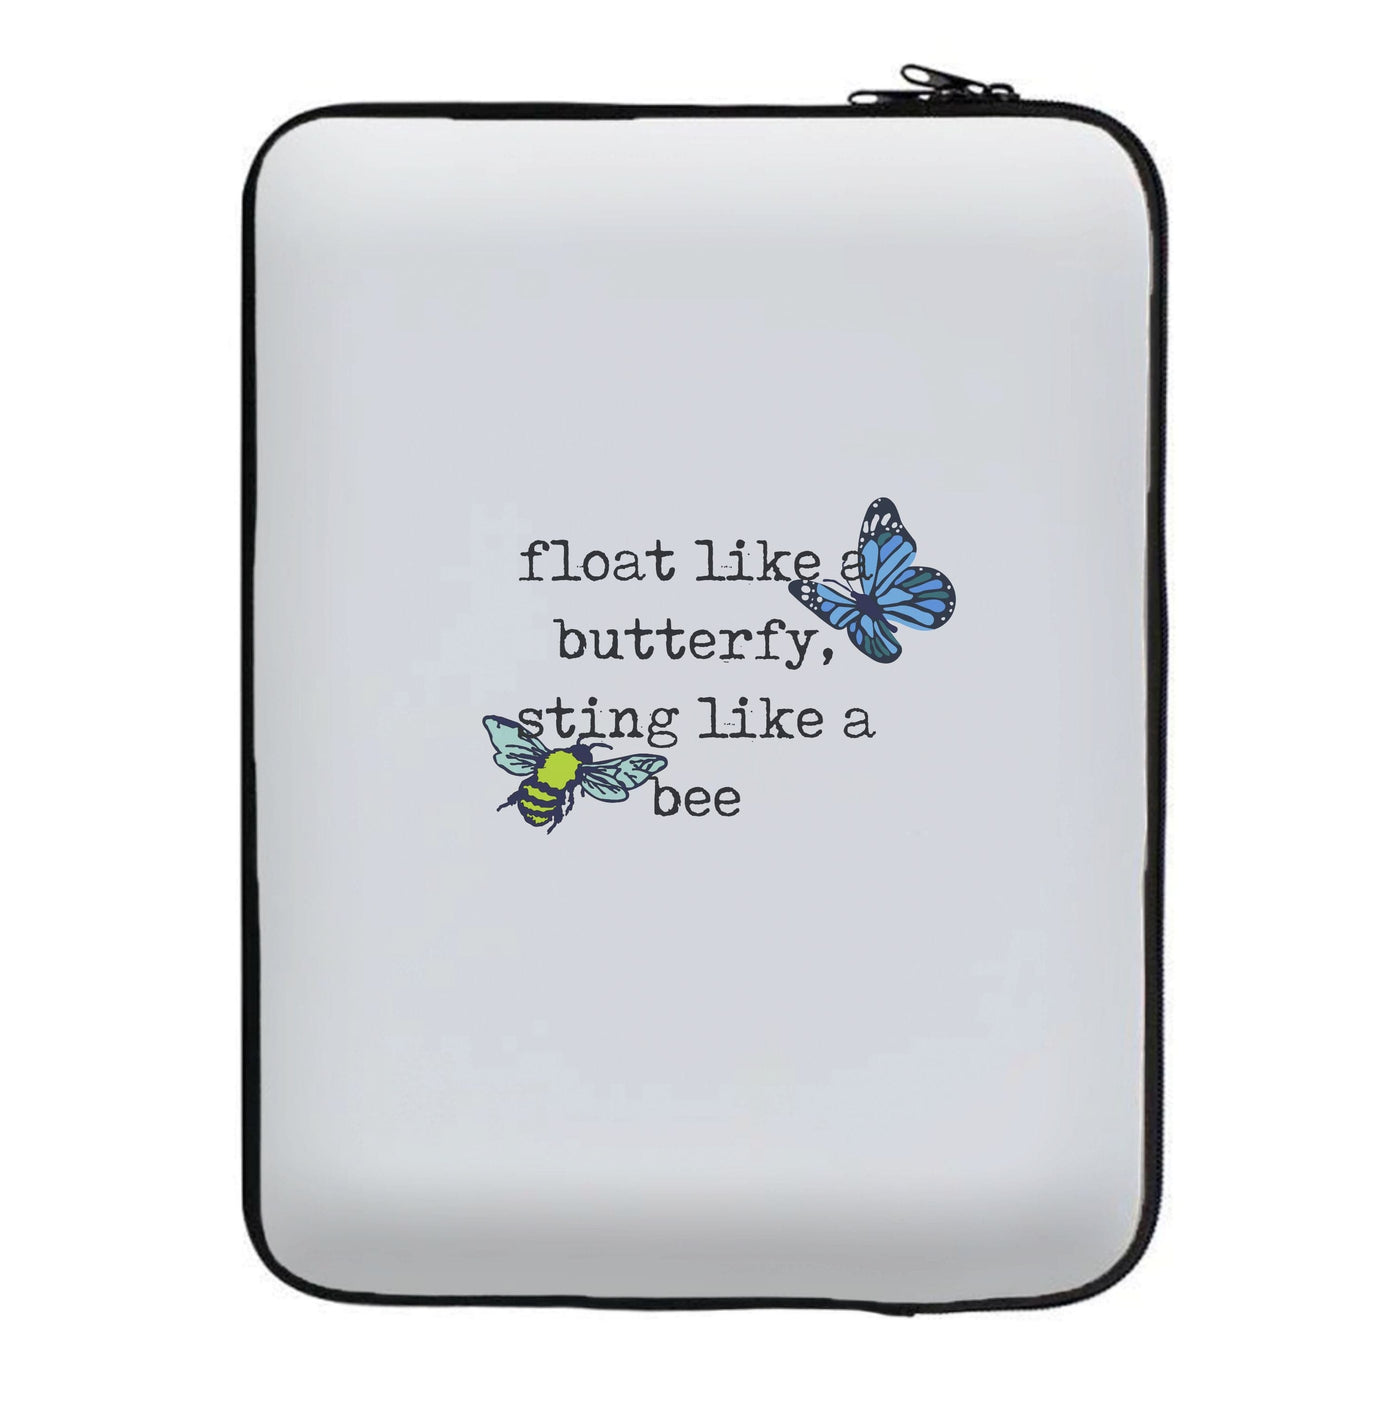 Float like a butterfly, sting like a bee - Boxing Laptop Sleeve